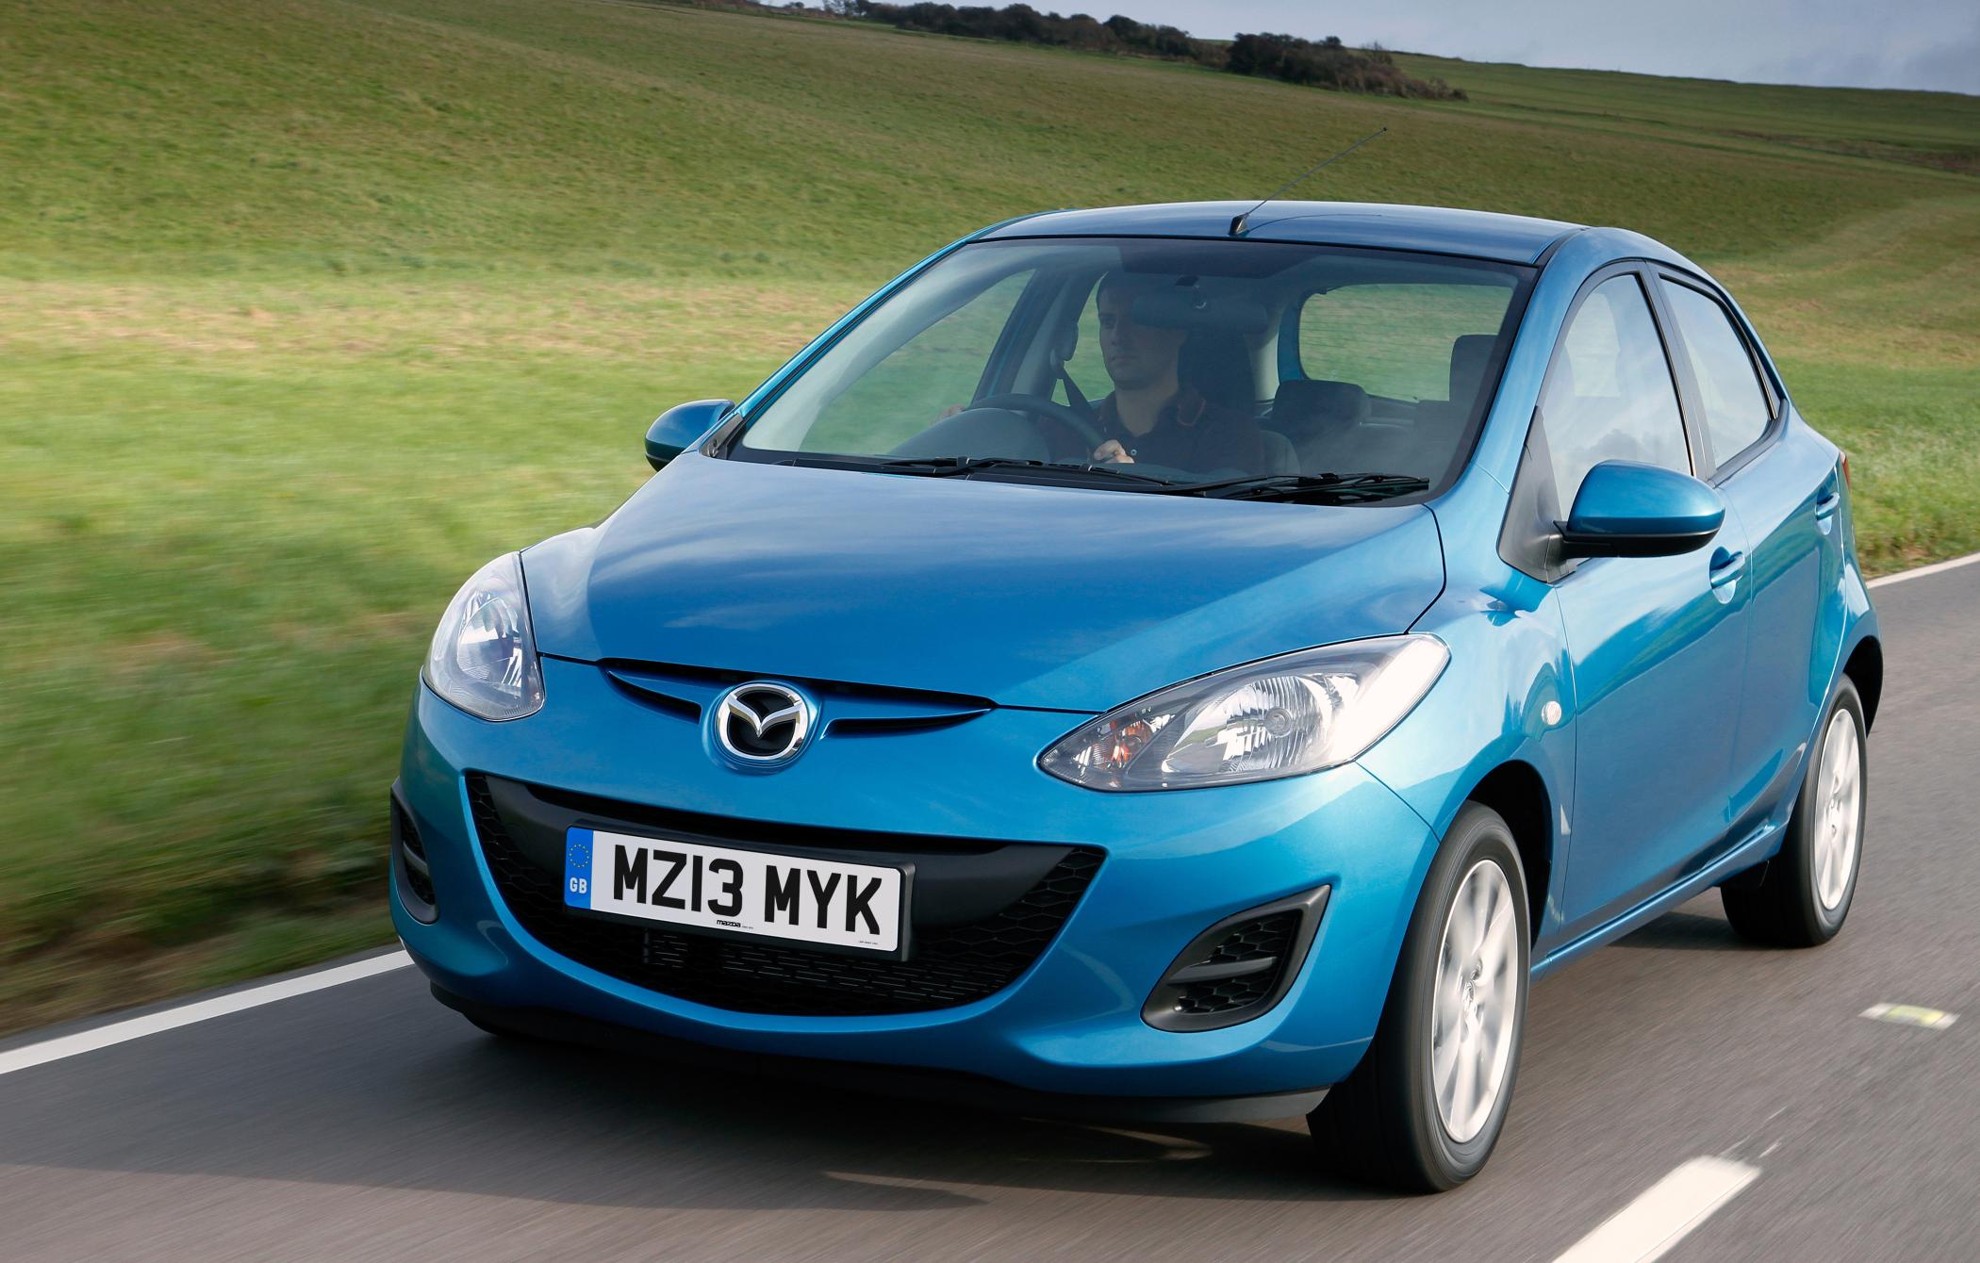 DRIVE AWAY A BRAND NEW MAZDA FROM JUST £169 PER MONTH!